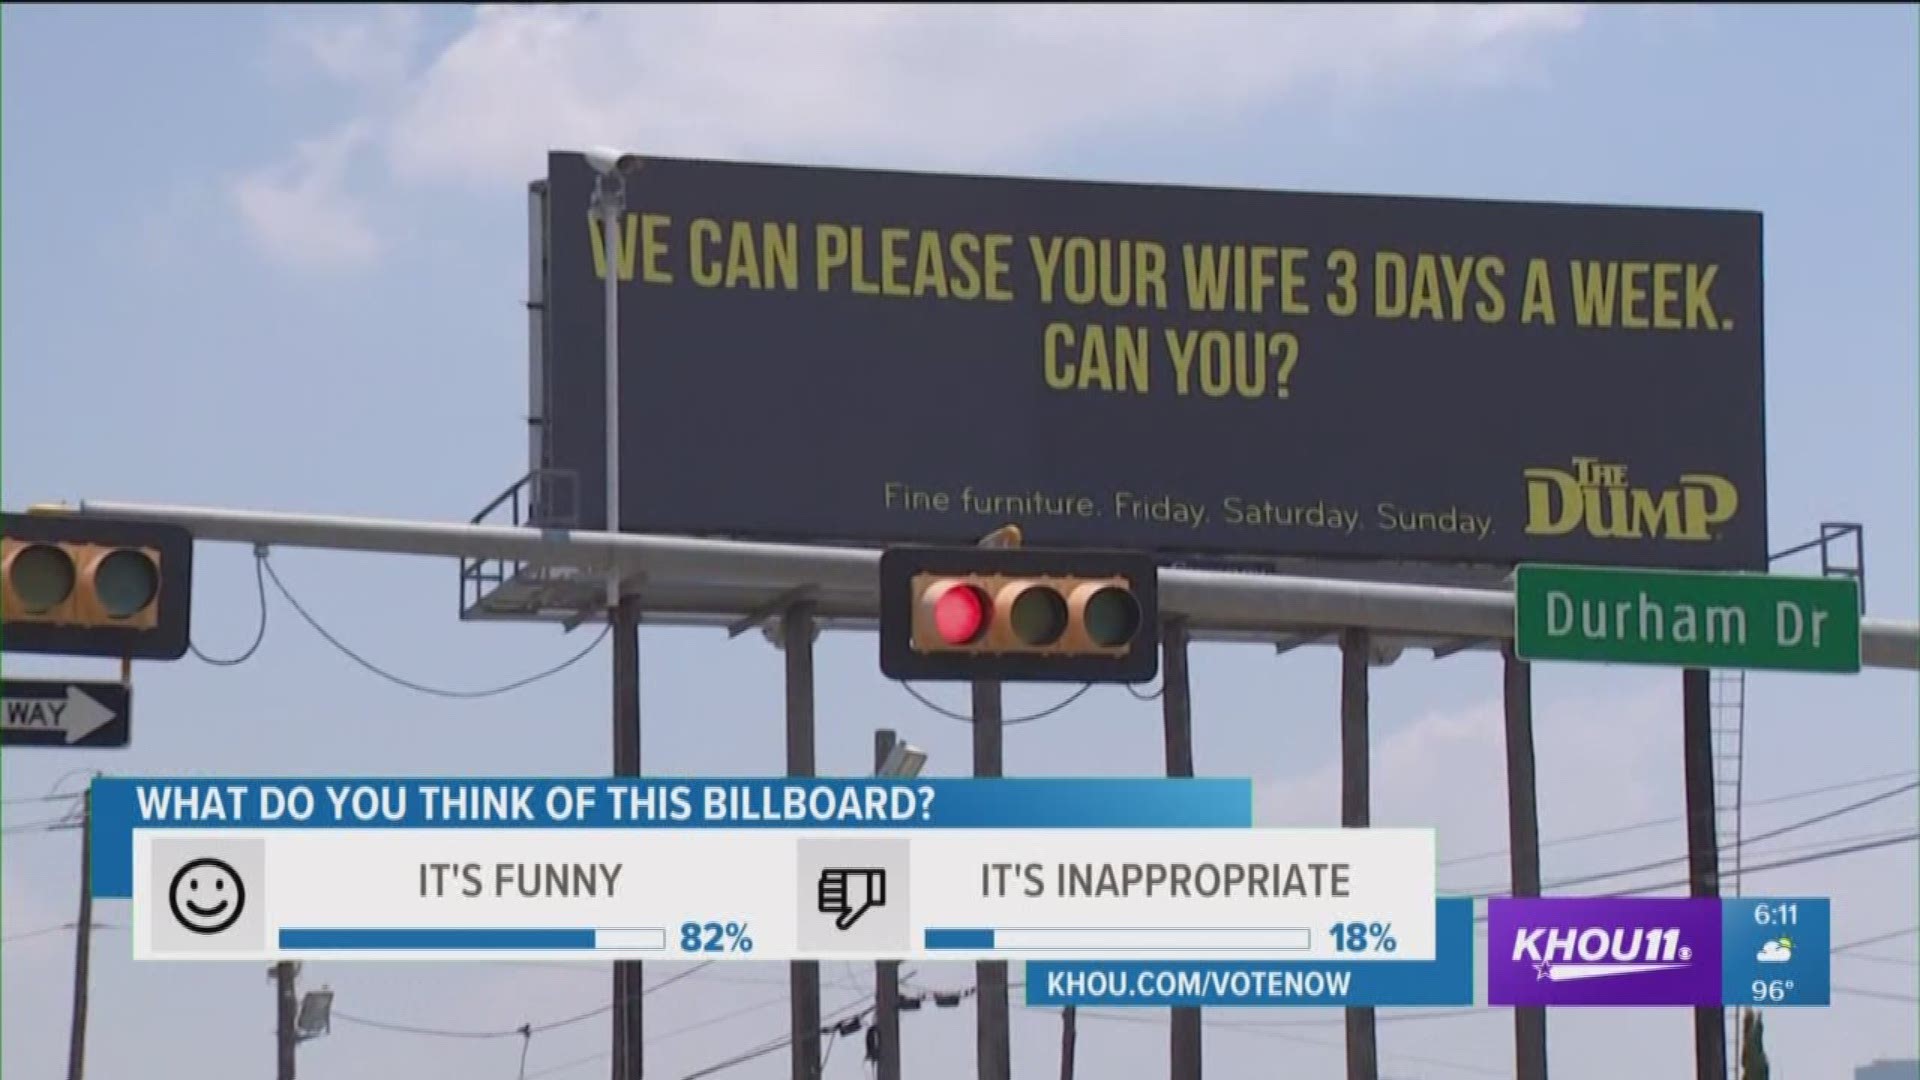 It's a debate happening along Durham and I-10, whether this billboard is smart of suggestive.